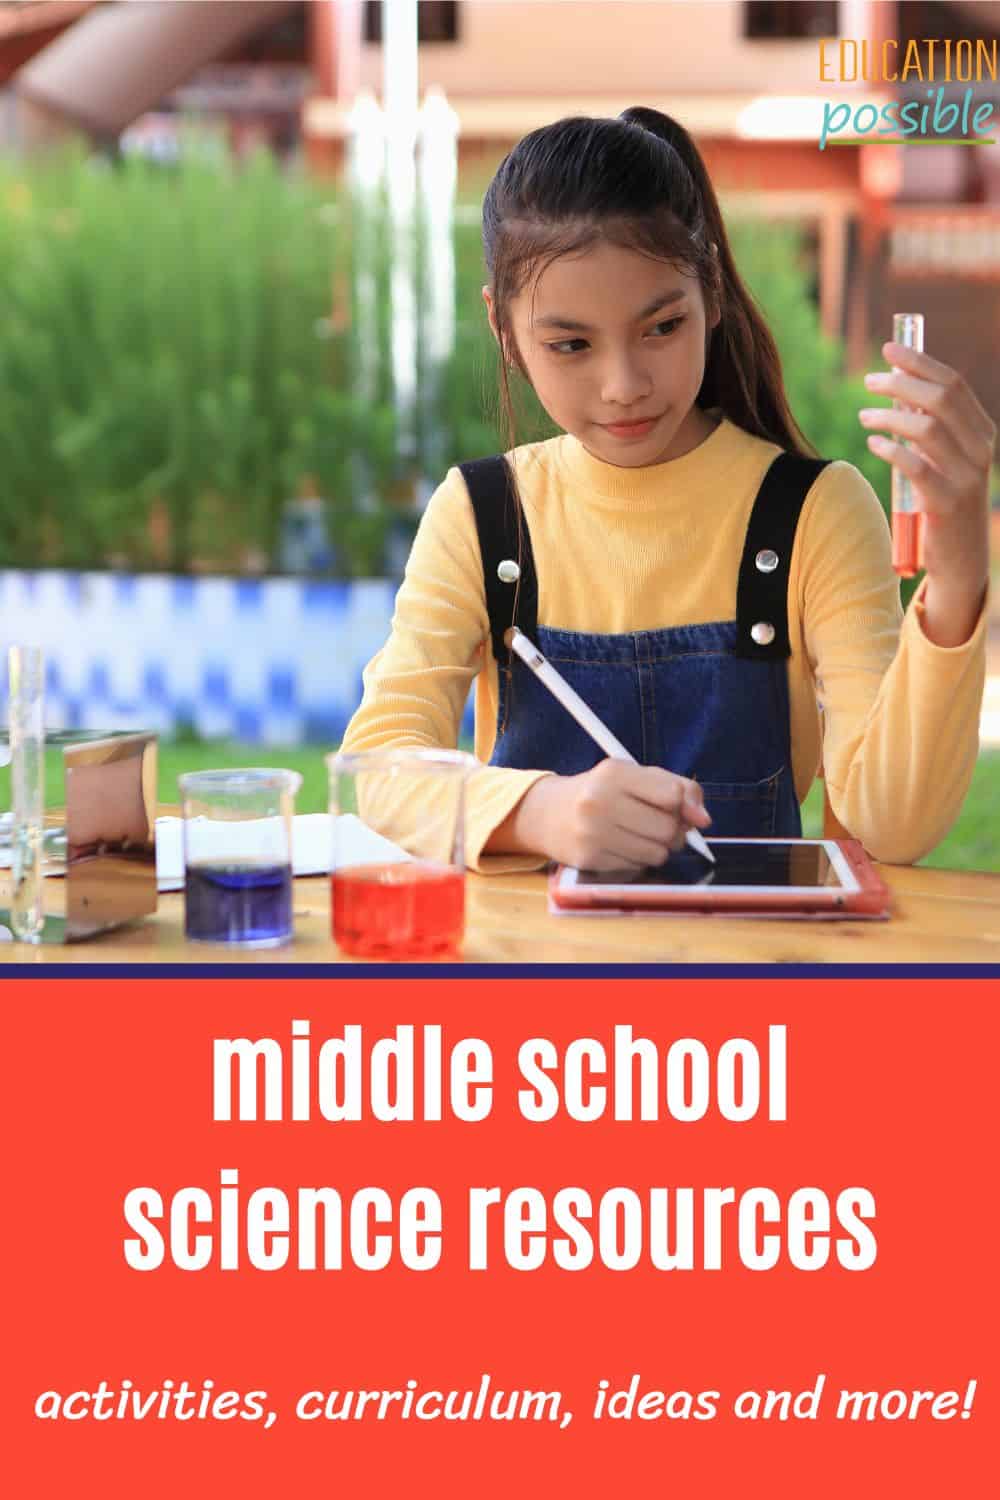 Teaching Middle School Science at Home